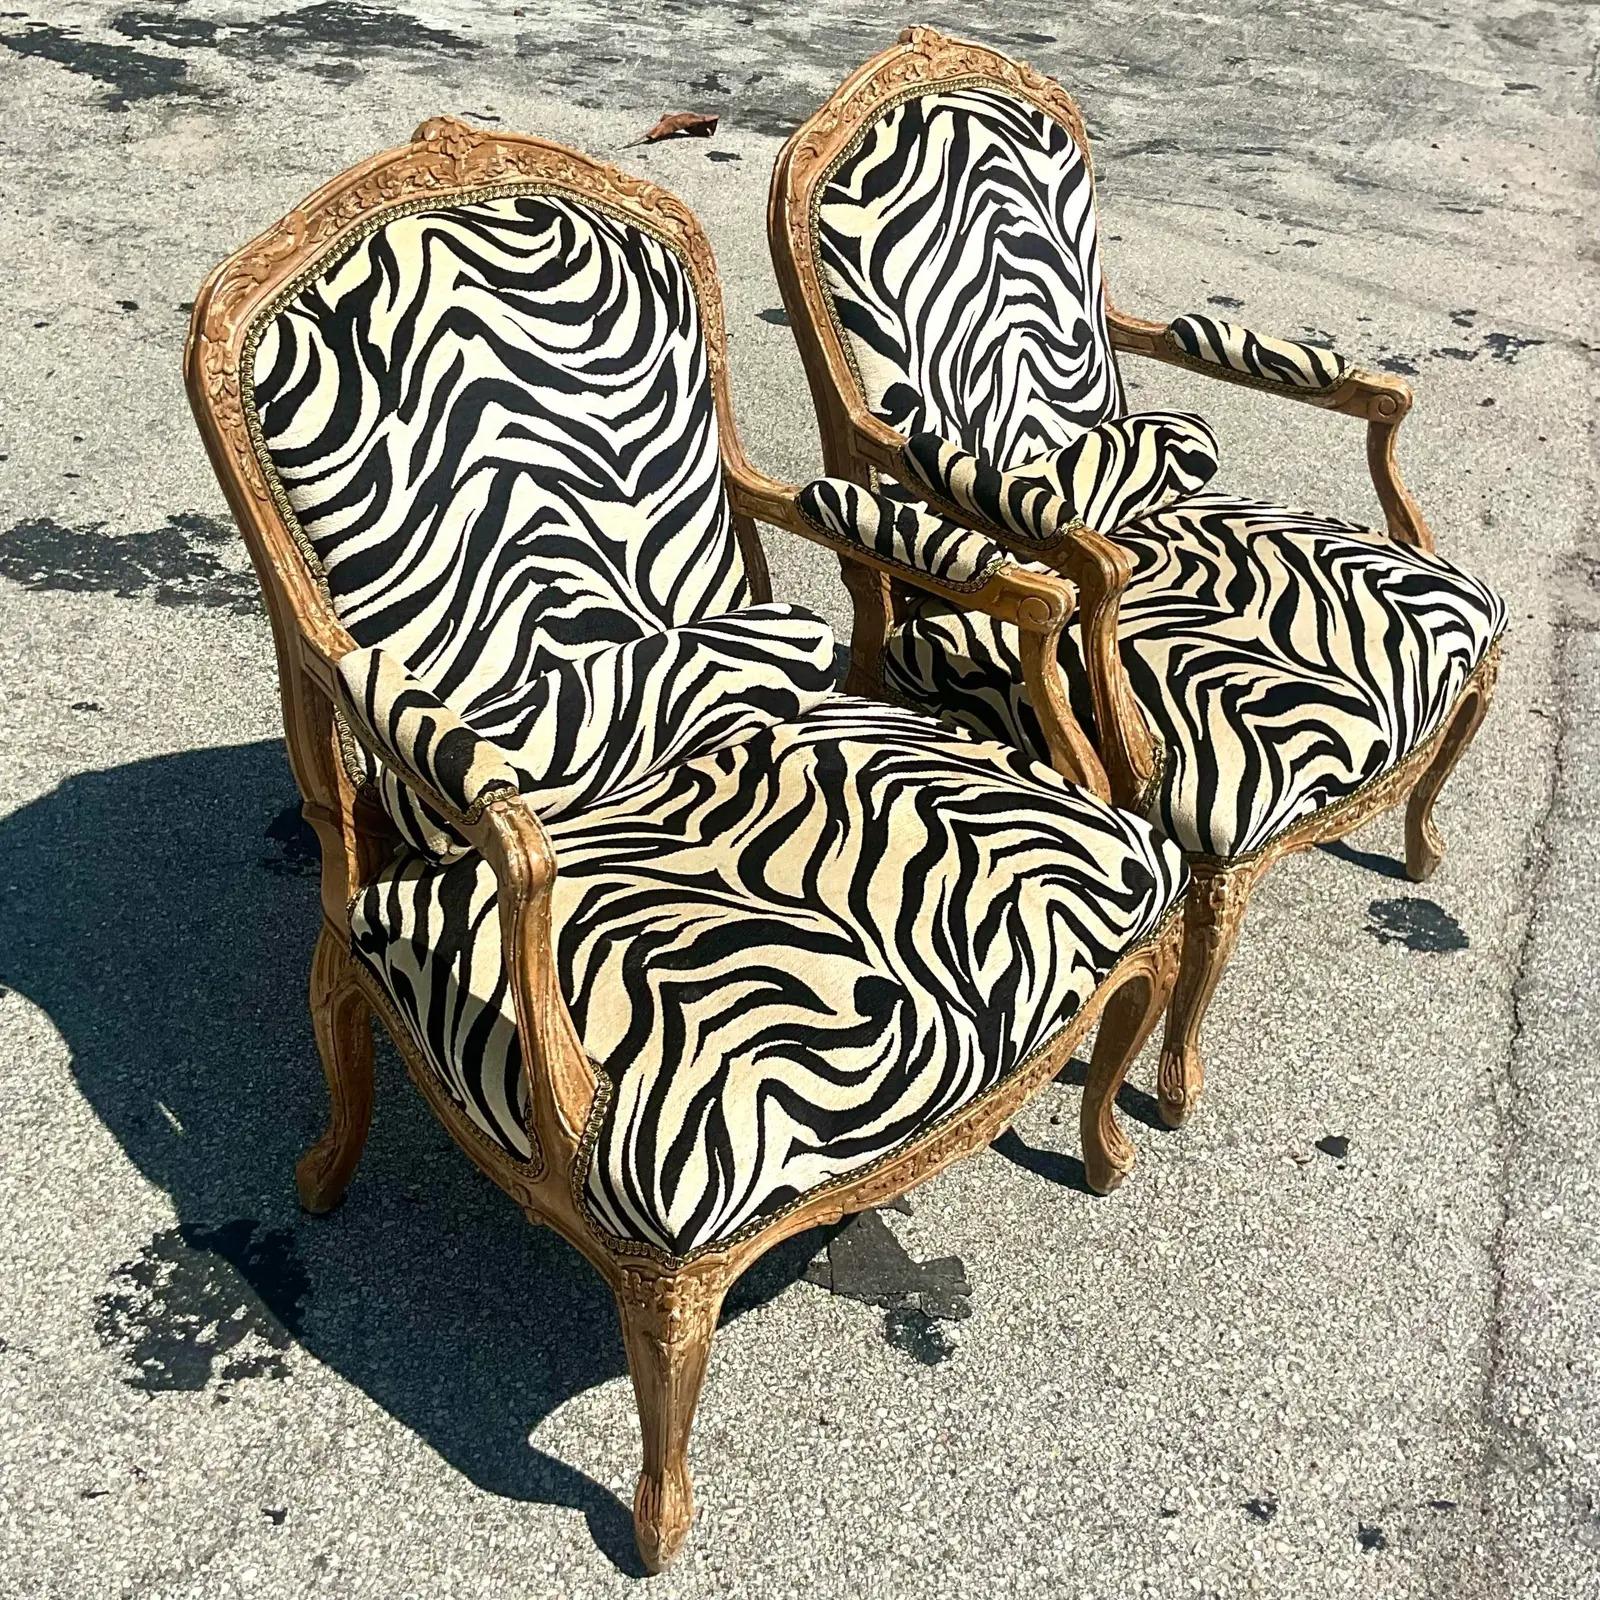 Gorgeous pair of vintage Regency chairs. Beautiful printed zebra on a classic Bergere shape. Beautiful carved wood detail. Acquired from a Palm Beach estate.

The chairs are in great vintage condition minor scuffs and blemishes appropriate to its